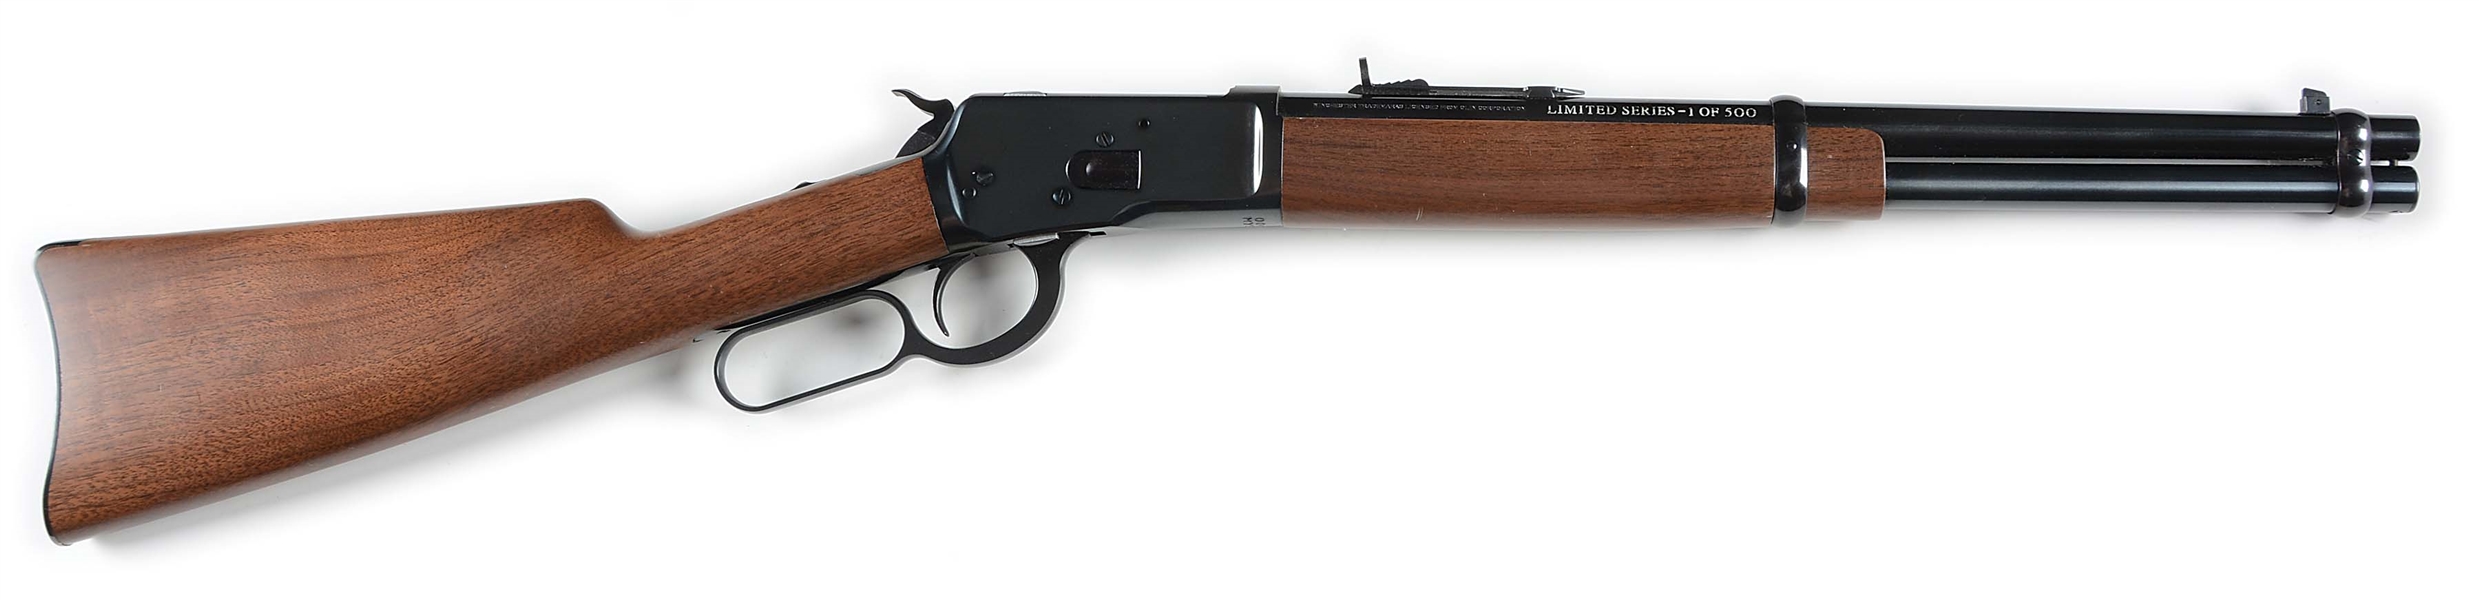 (M) WINCHESTER 1892 LEVER ACTION CARBINE "1 OF 500" MADE BY MIROKU.